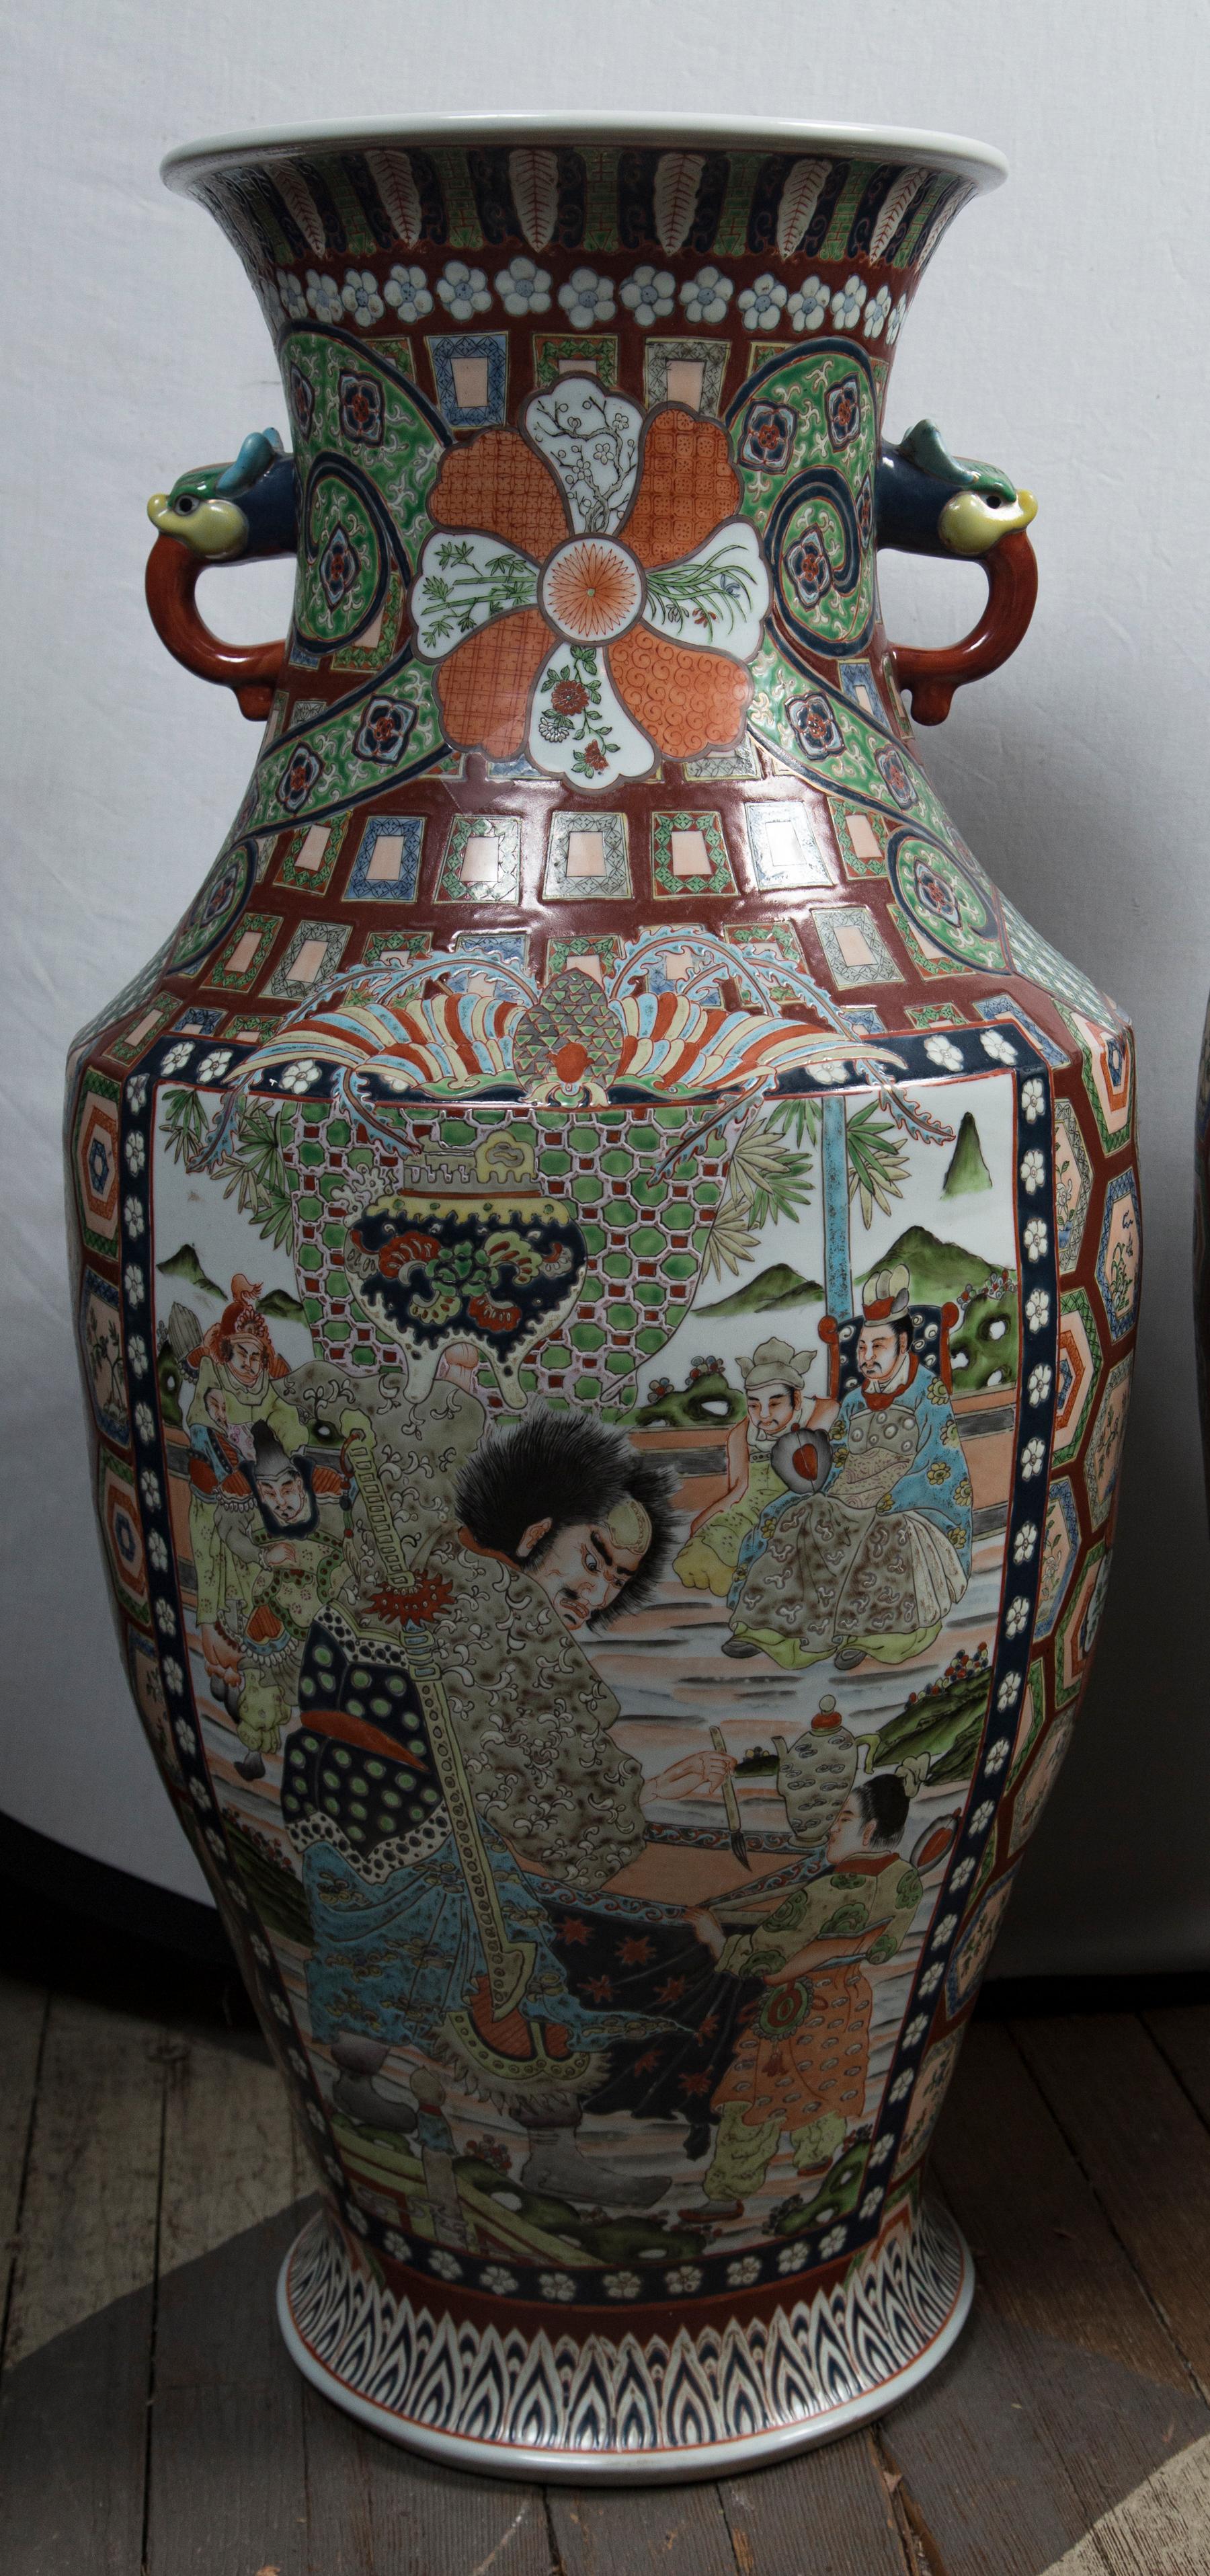 In typical satsuma design and colors. Bird head handles
Garden scenes, Courtyard, musician
Unmarked
Measures: Mouth is 11.5 in diameter
Base is 11 in diameter.